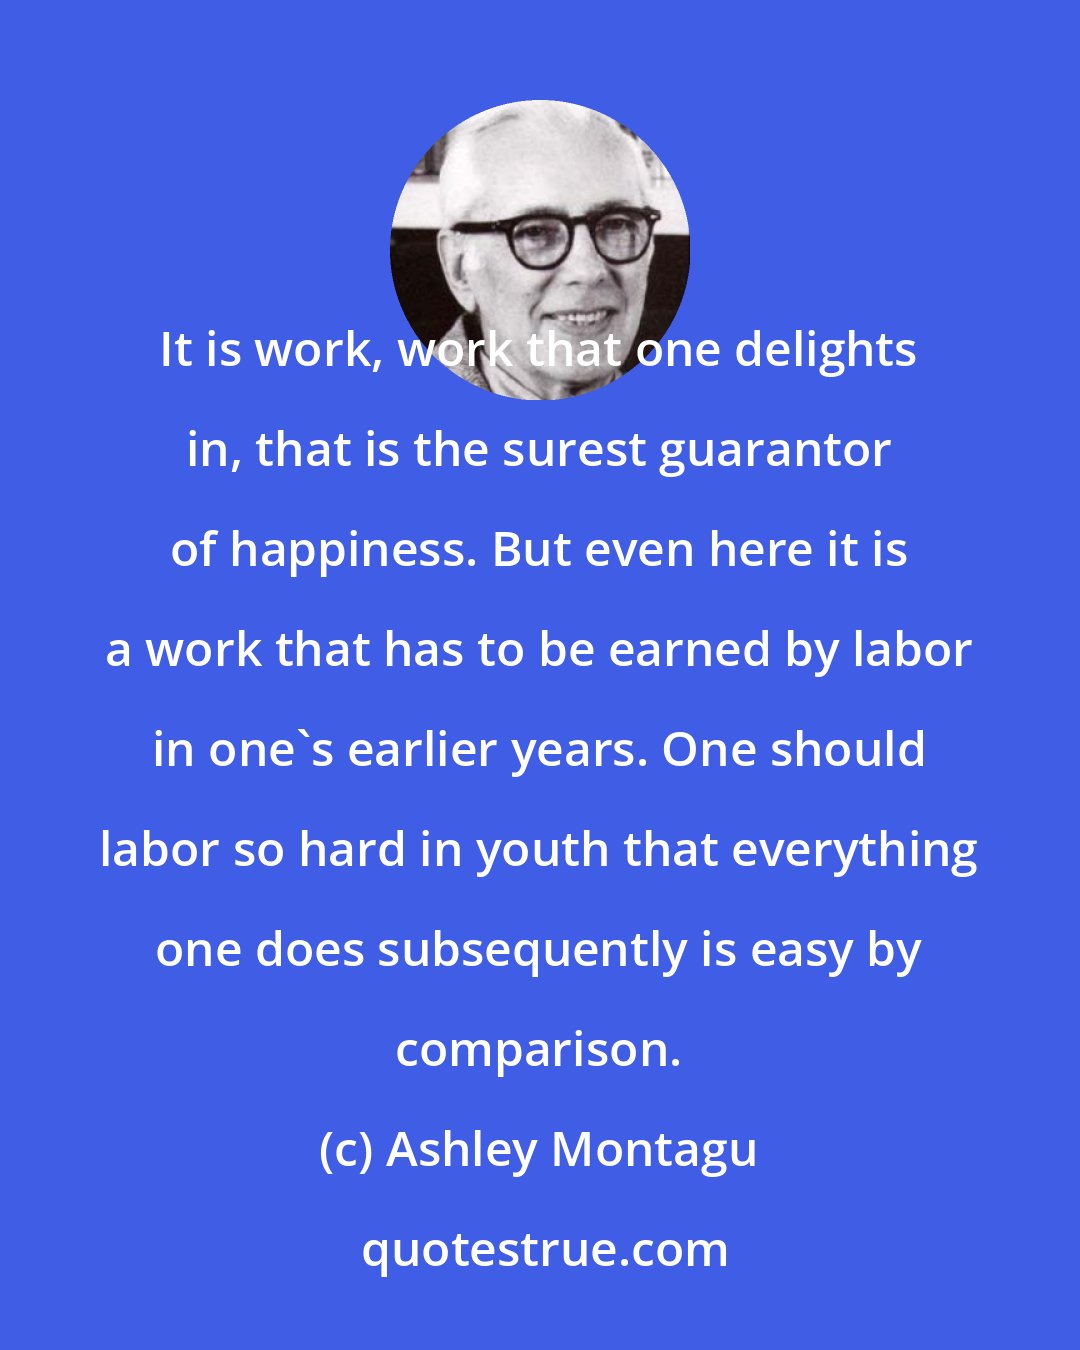 Ashley Montagu: It is work, work that one delights in, that is the surest guarantor of happiness. But even here it is a work that has to be earned by labor in one's earlier years. One should labor so hard in youth that everything one does subsequently is easy by comparison.